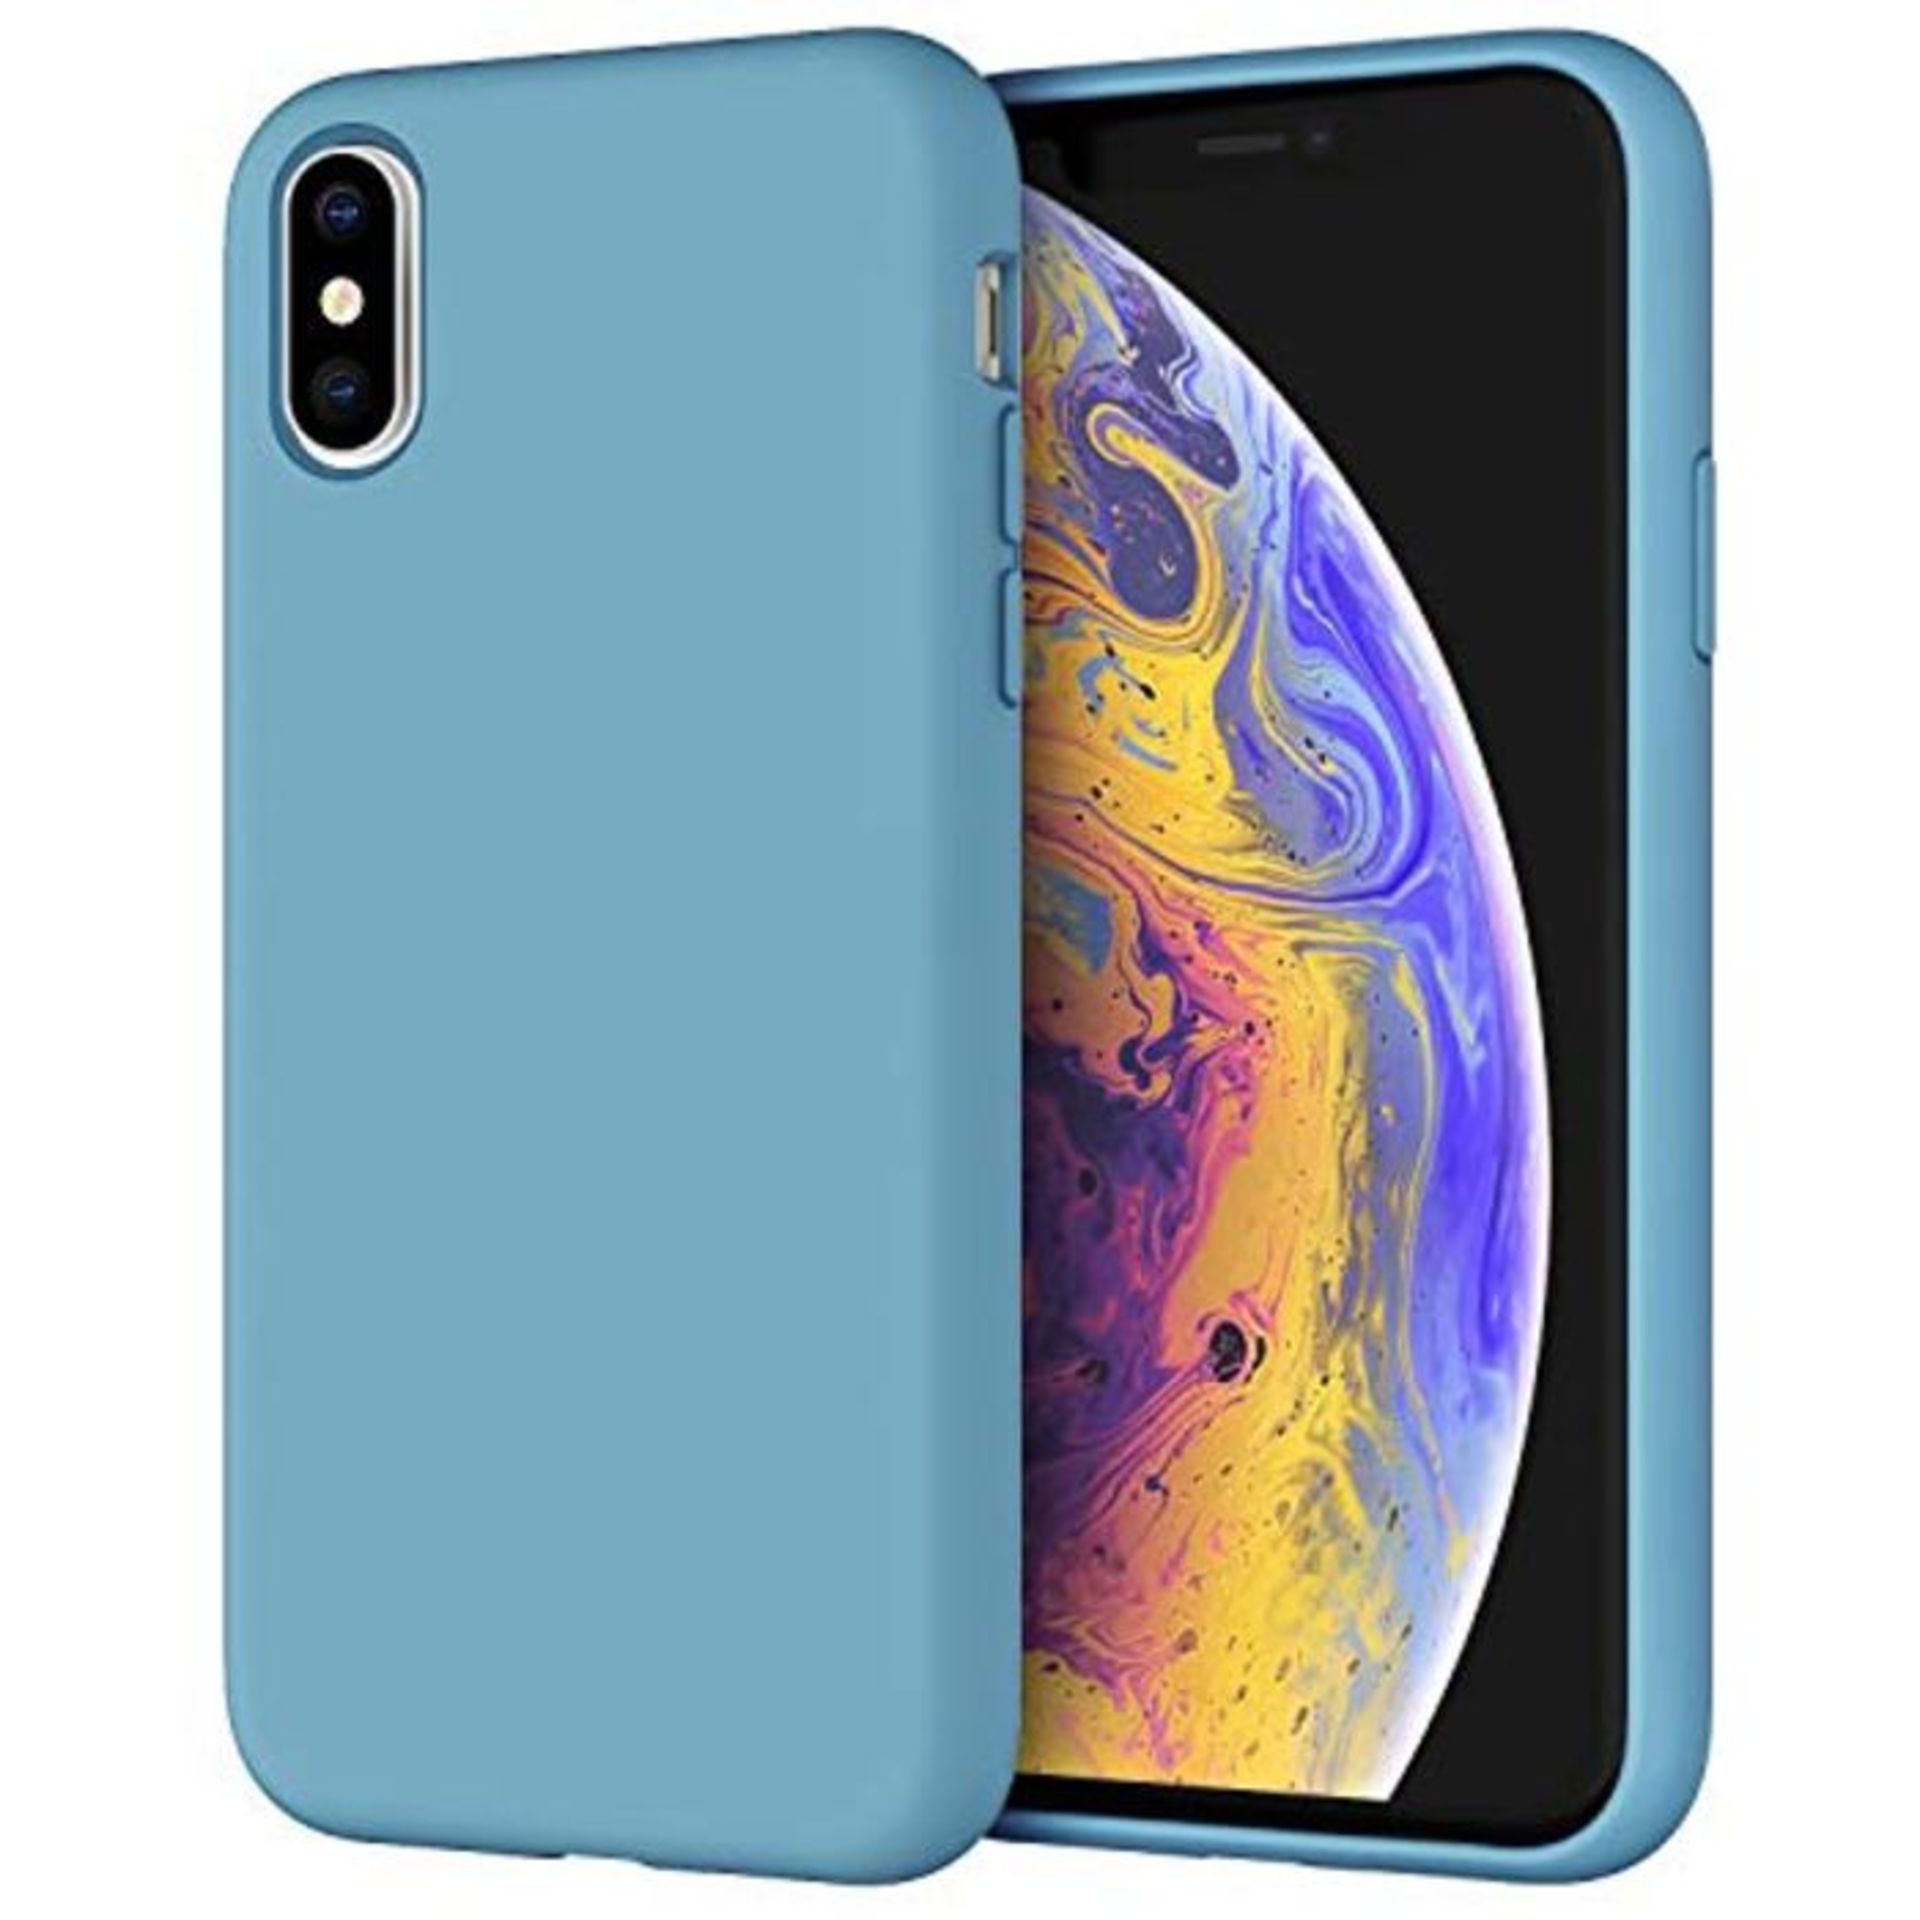 JETech Silicone Case for iPhone X, iPhone XS, 5.8-Inch, Silky-soft touch Full-Body Pro